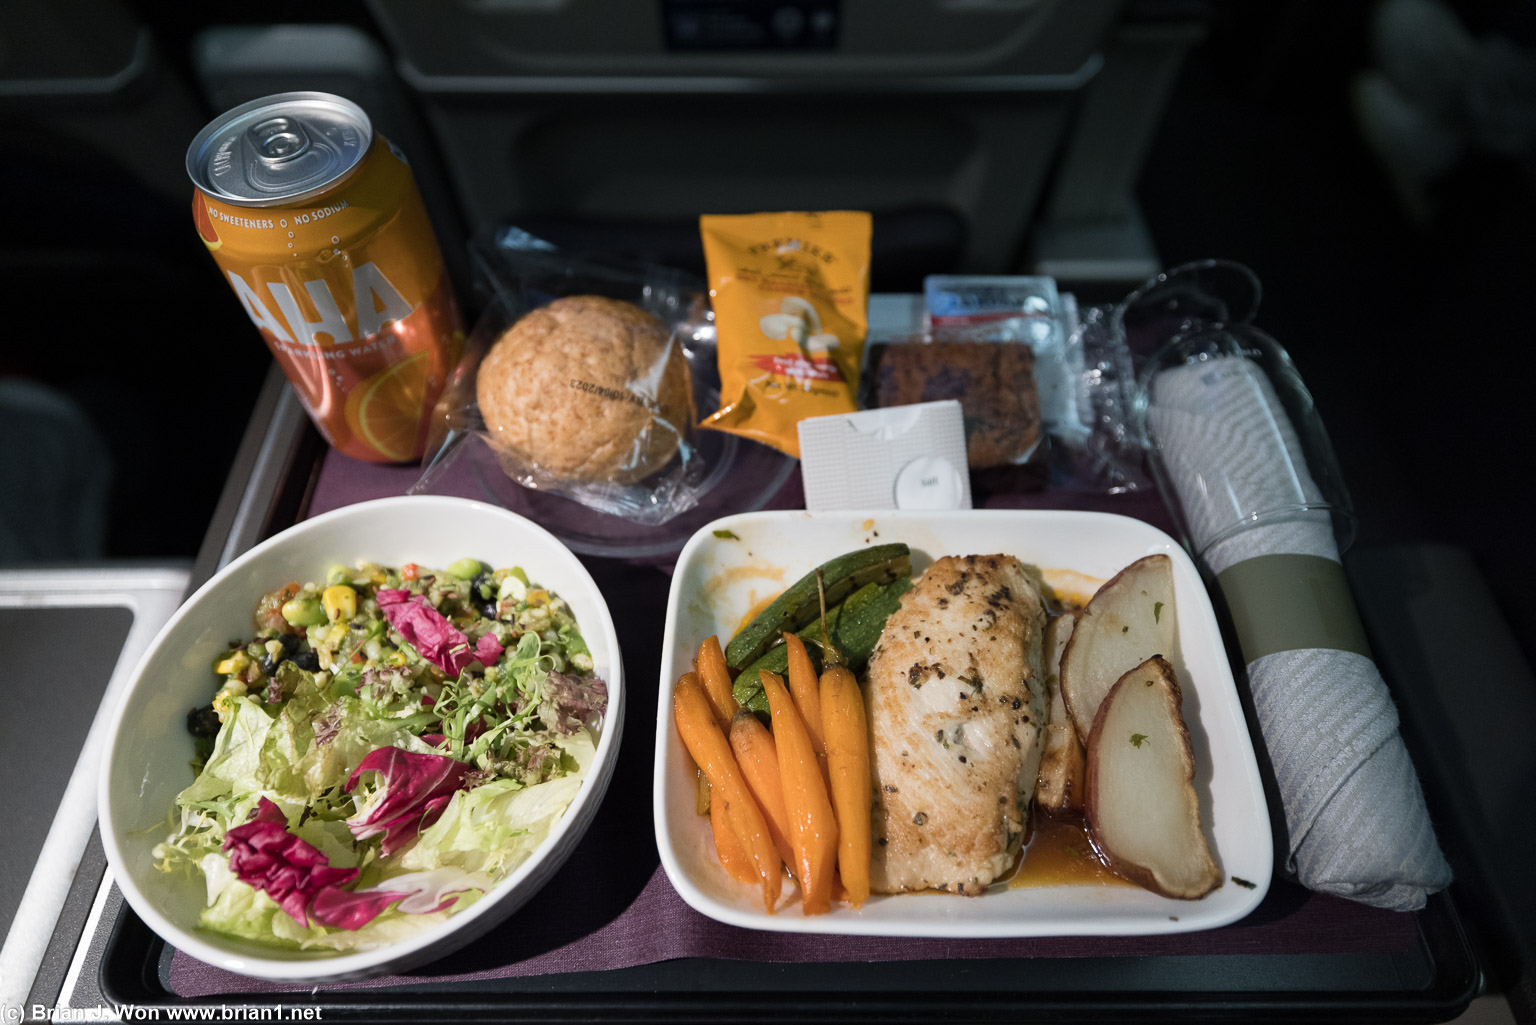 United's food is getting better, but still a far cry from where it could be.